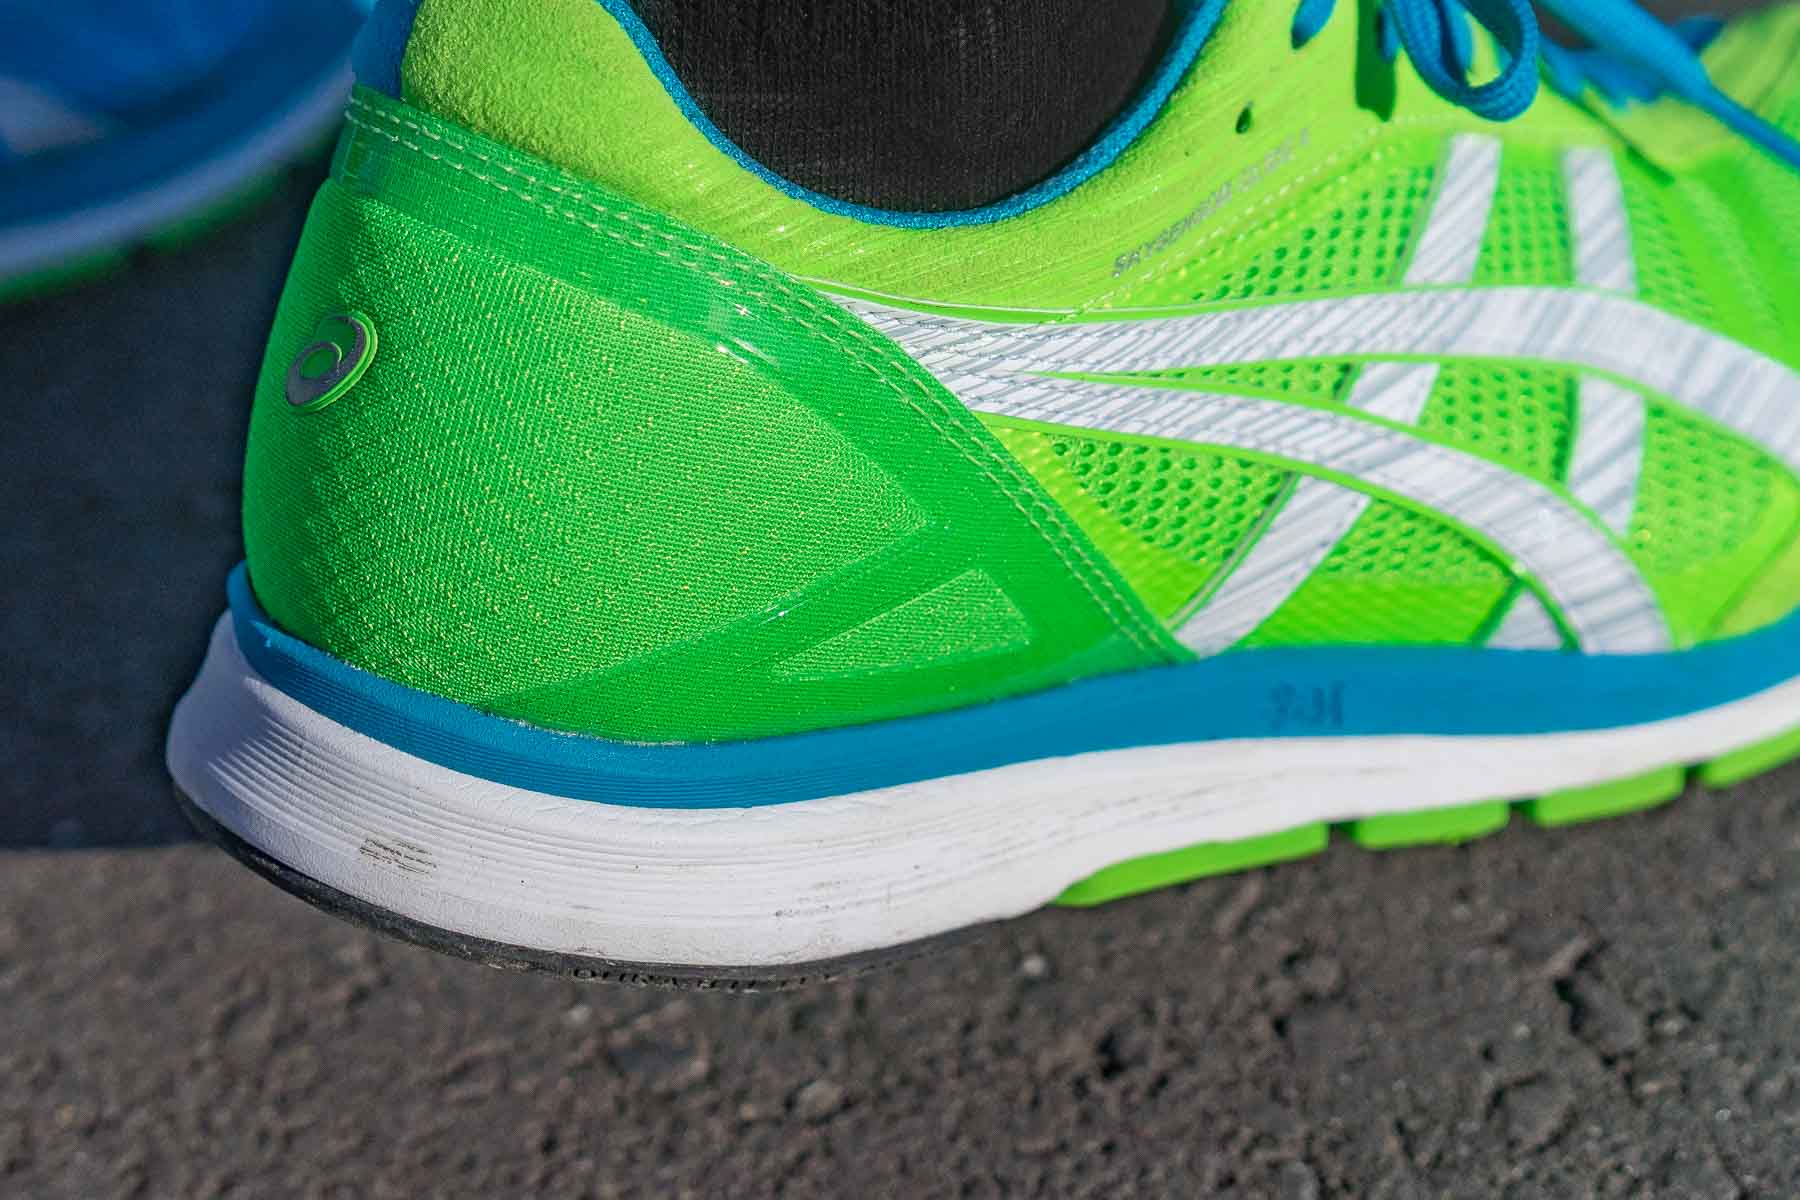 asics-skysensor-glide-4-wide-review-11 